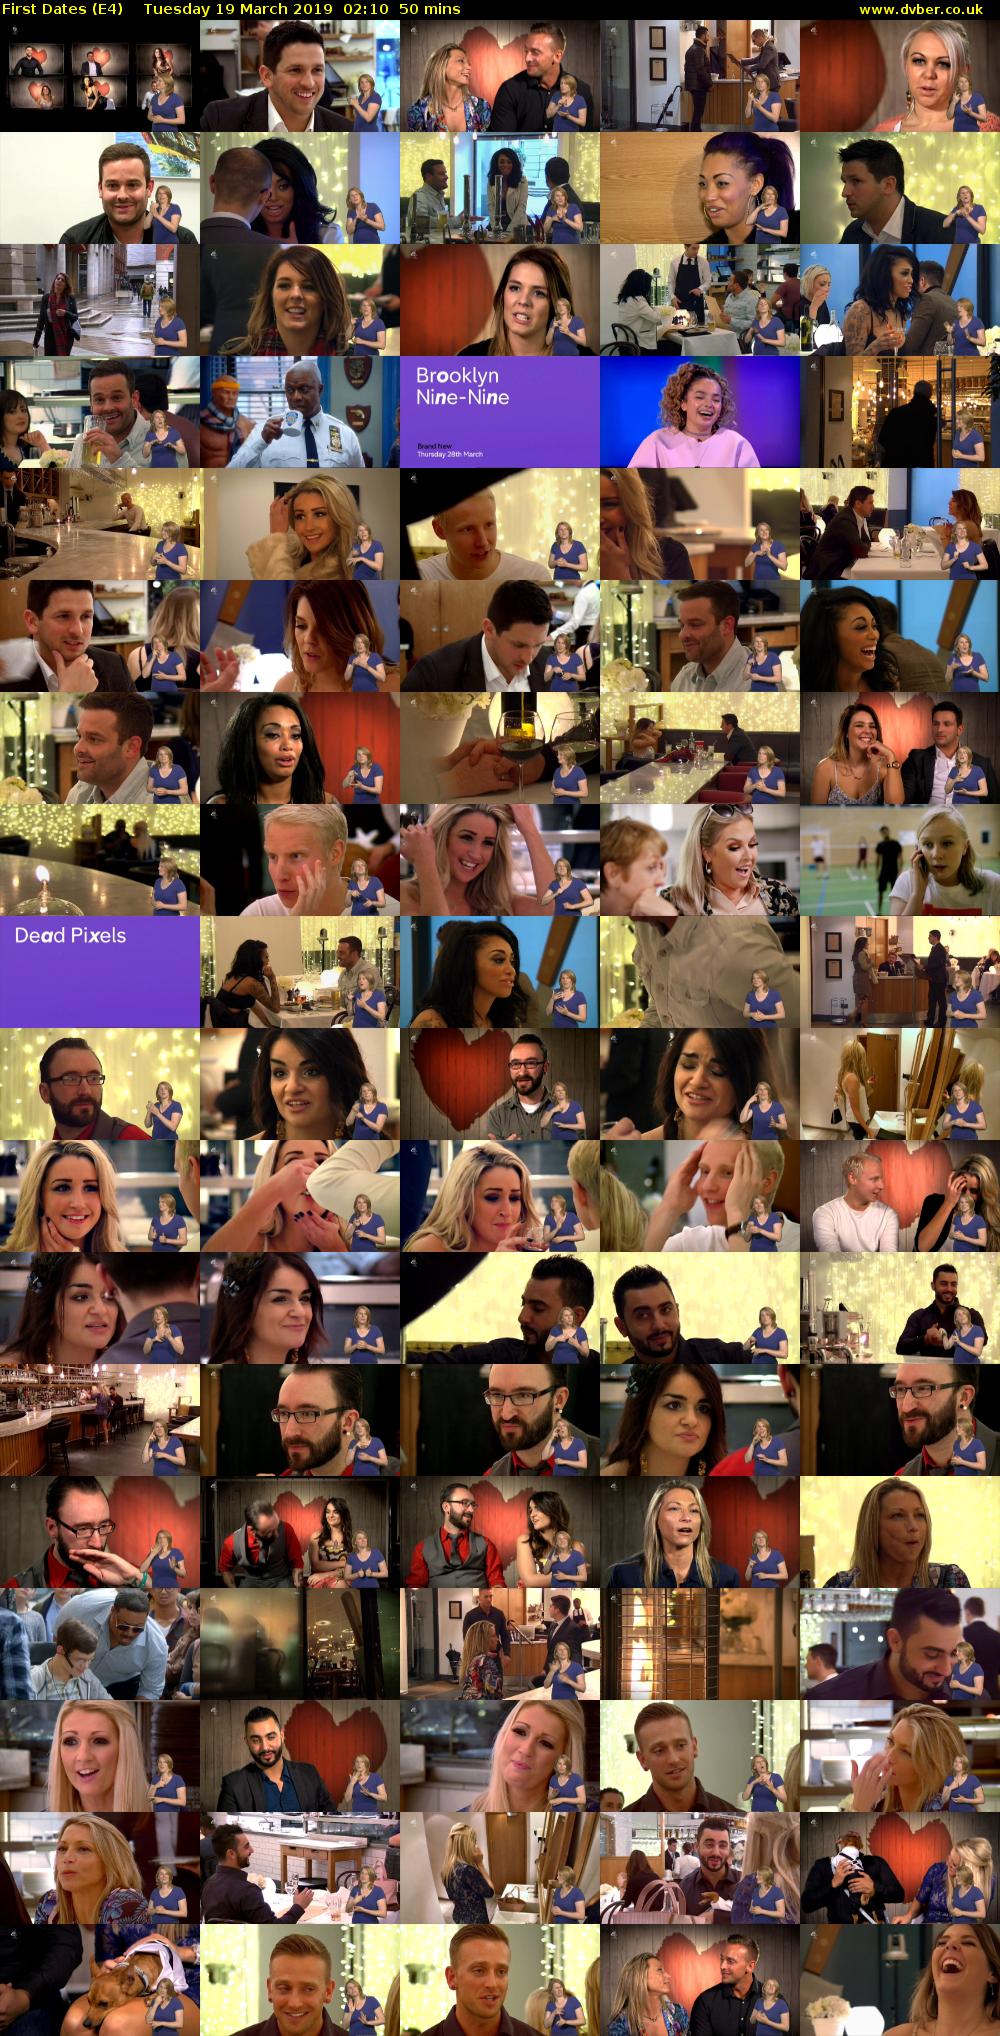 First Dates (E4) Tuesday 19 March 2019 02:10 - 03:00